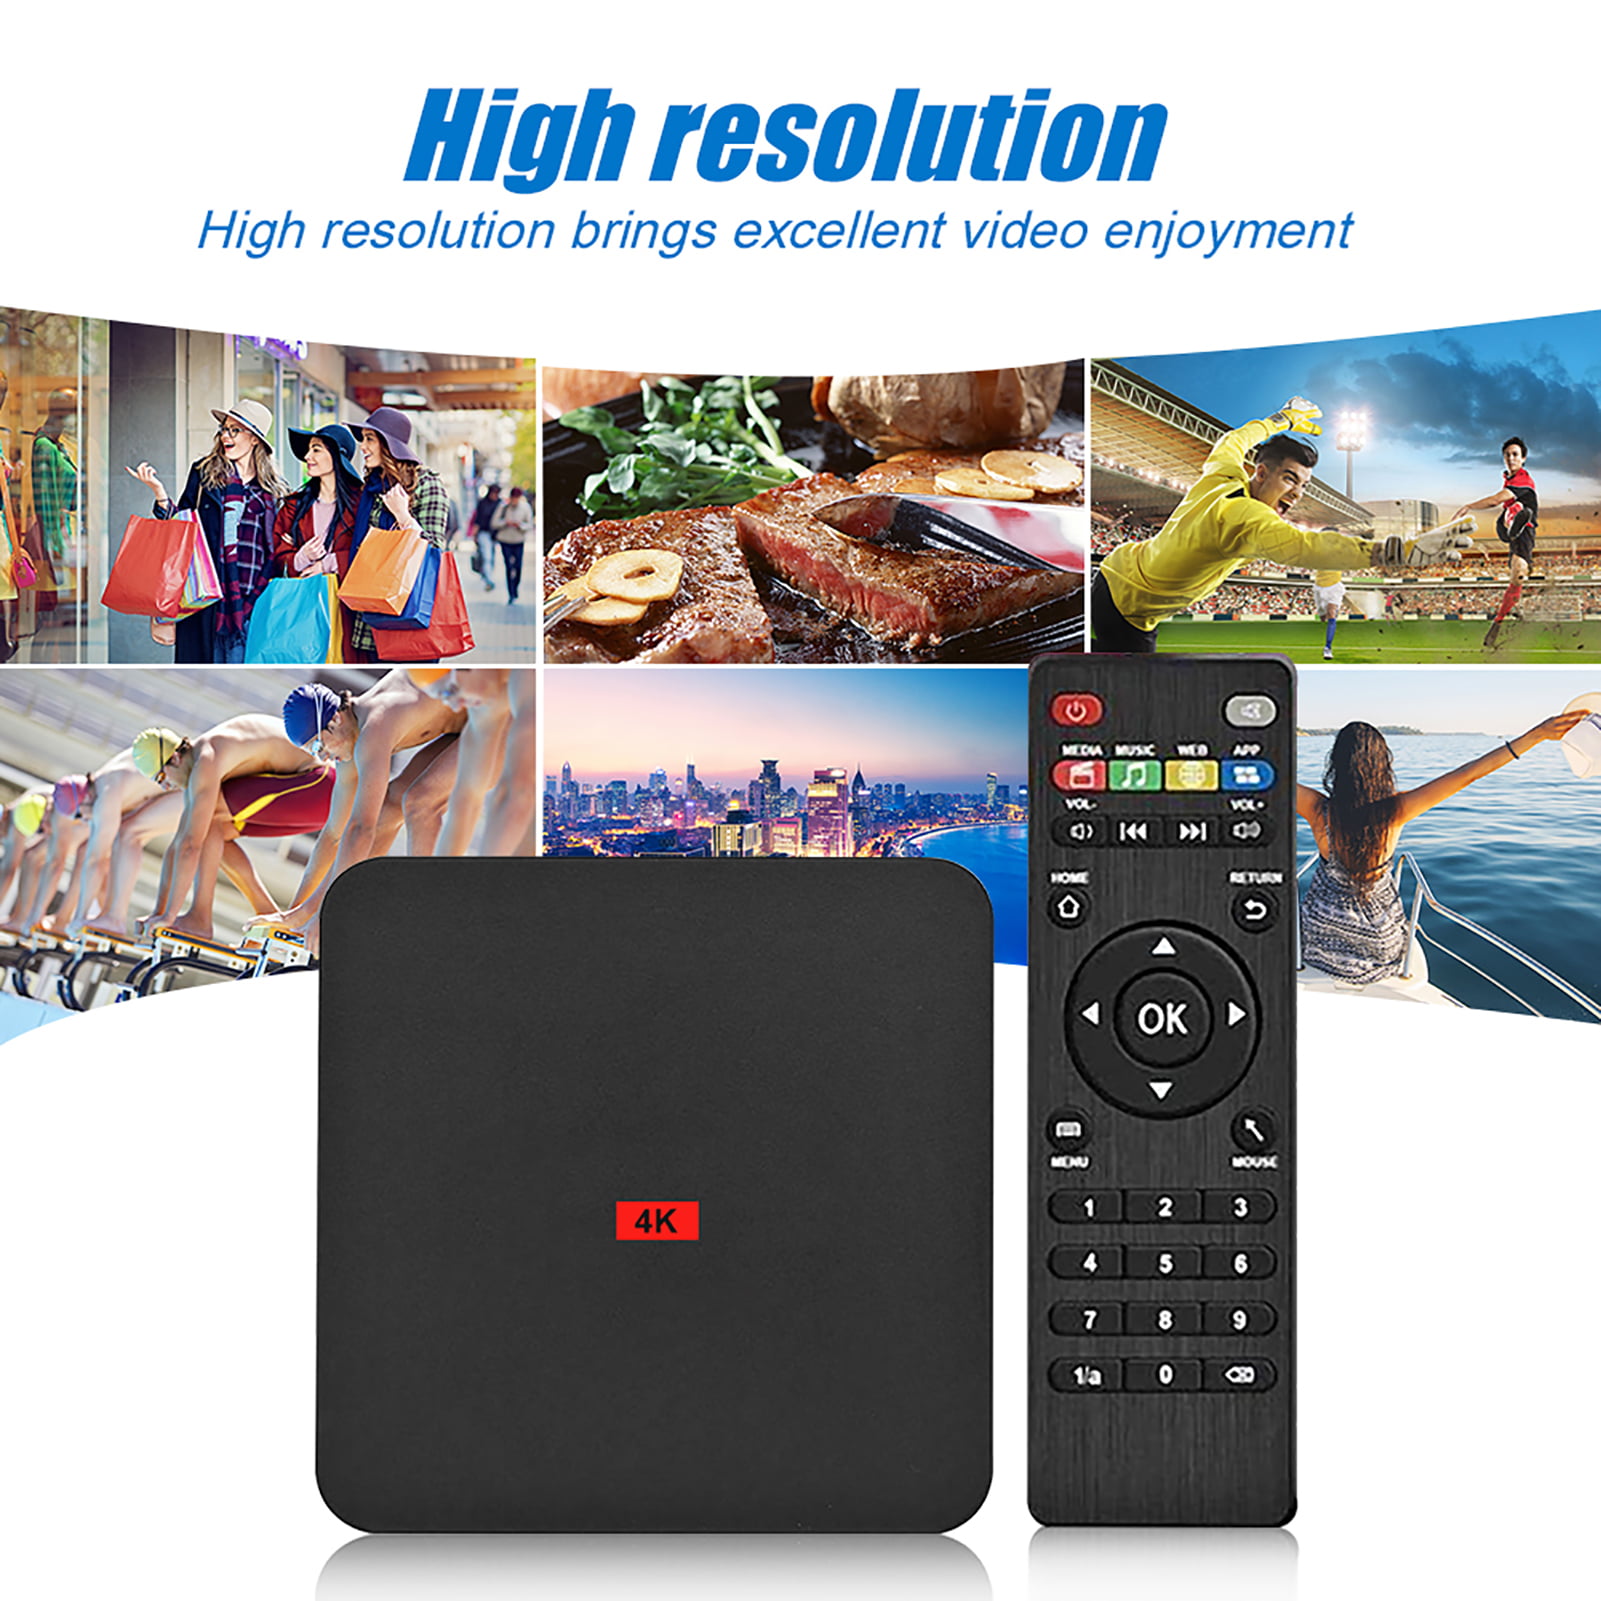 FOR ANDROID 10.0 HOME WIFI RK3229 1G+8G TV SET TOP BOX 4K HD SMART MEDIA PLAYER 